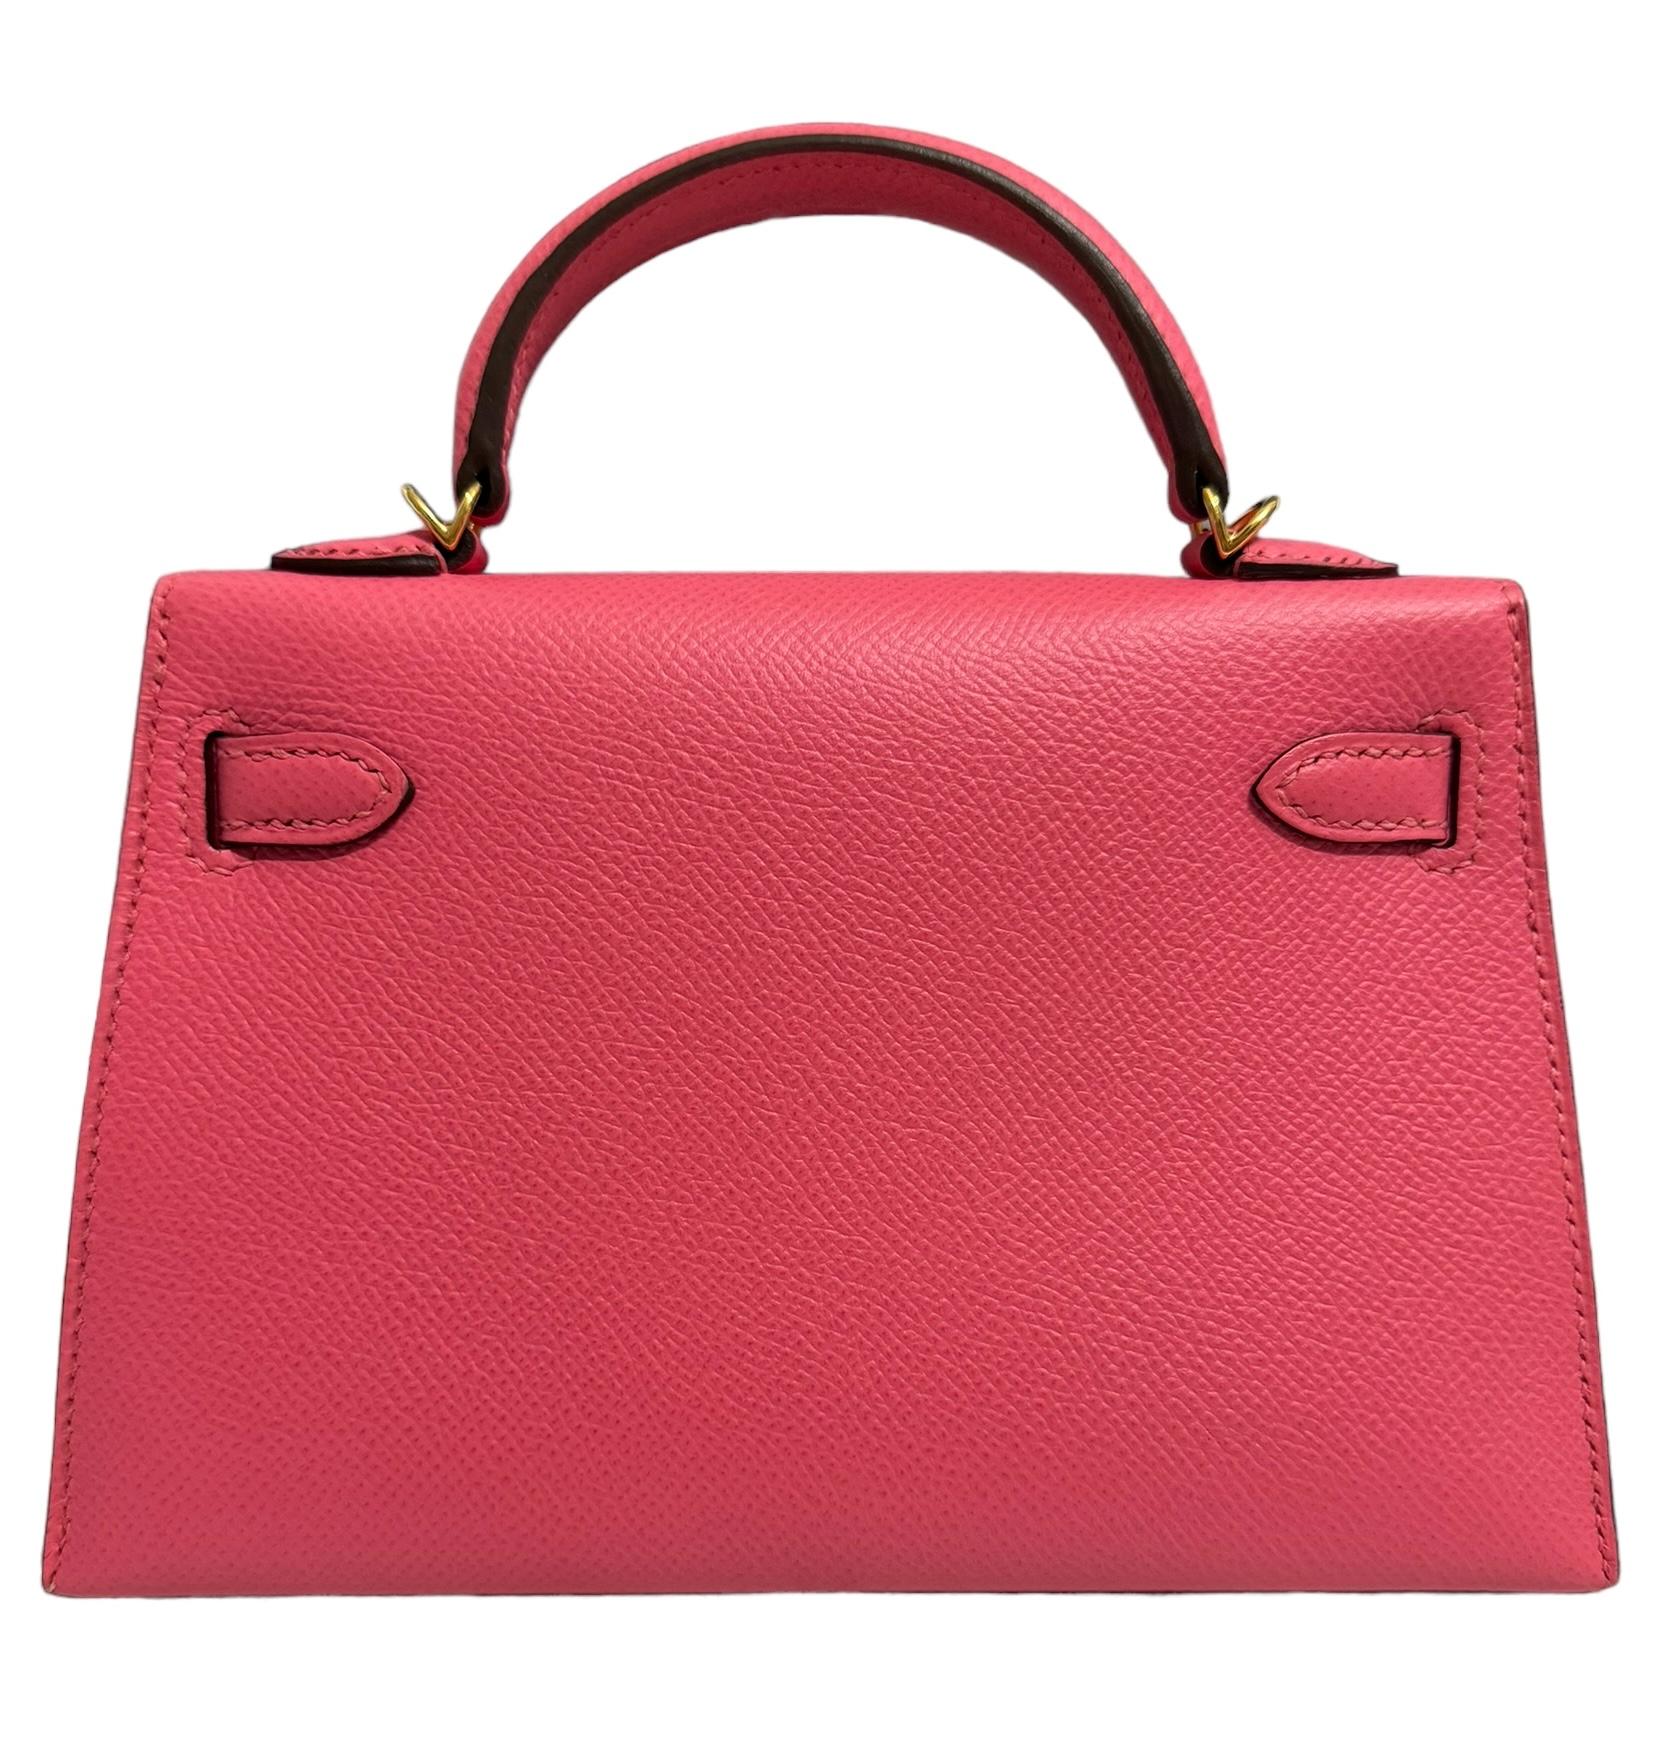 Hermes Kelly Mini 20 Rose Azalee Azalea Pink Epsom Leather Gold Hardware In New Condition For Sale In Miami, FL